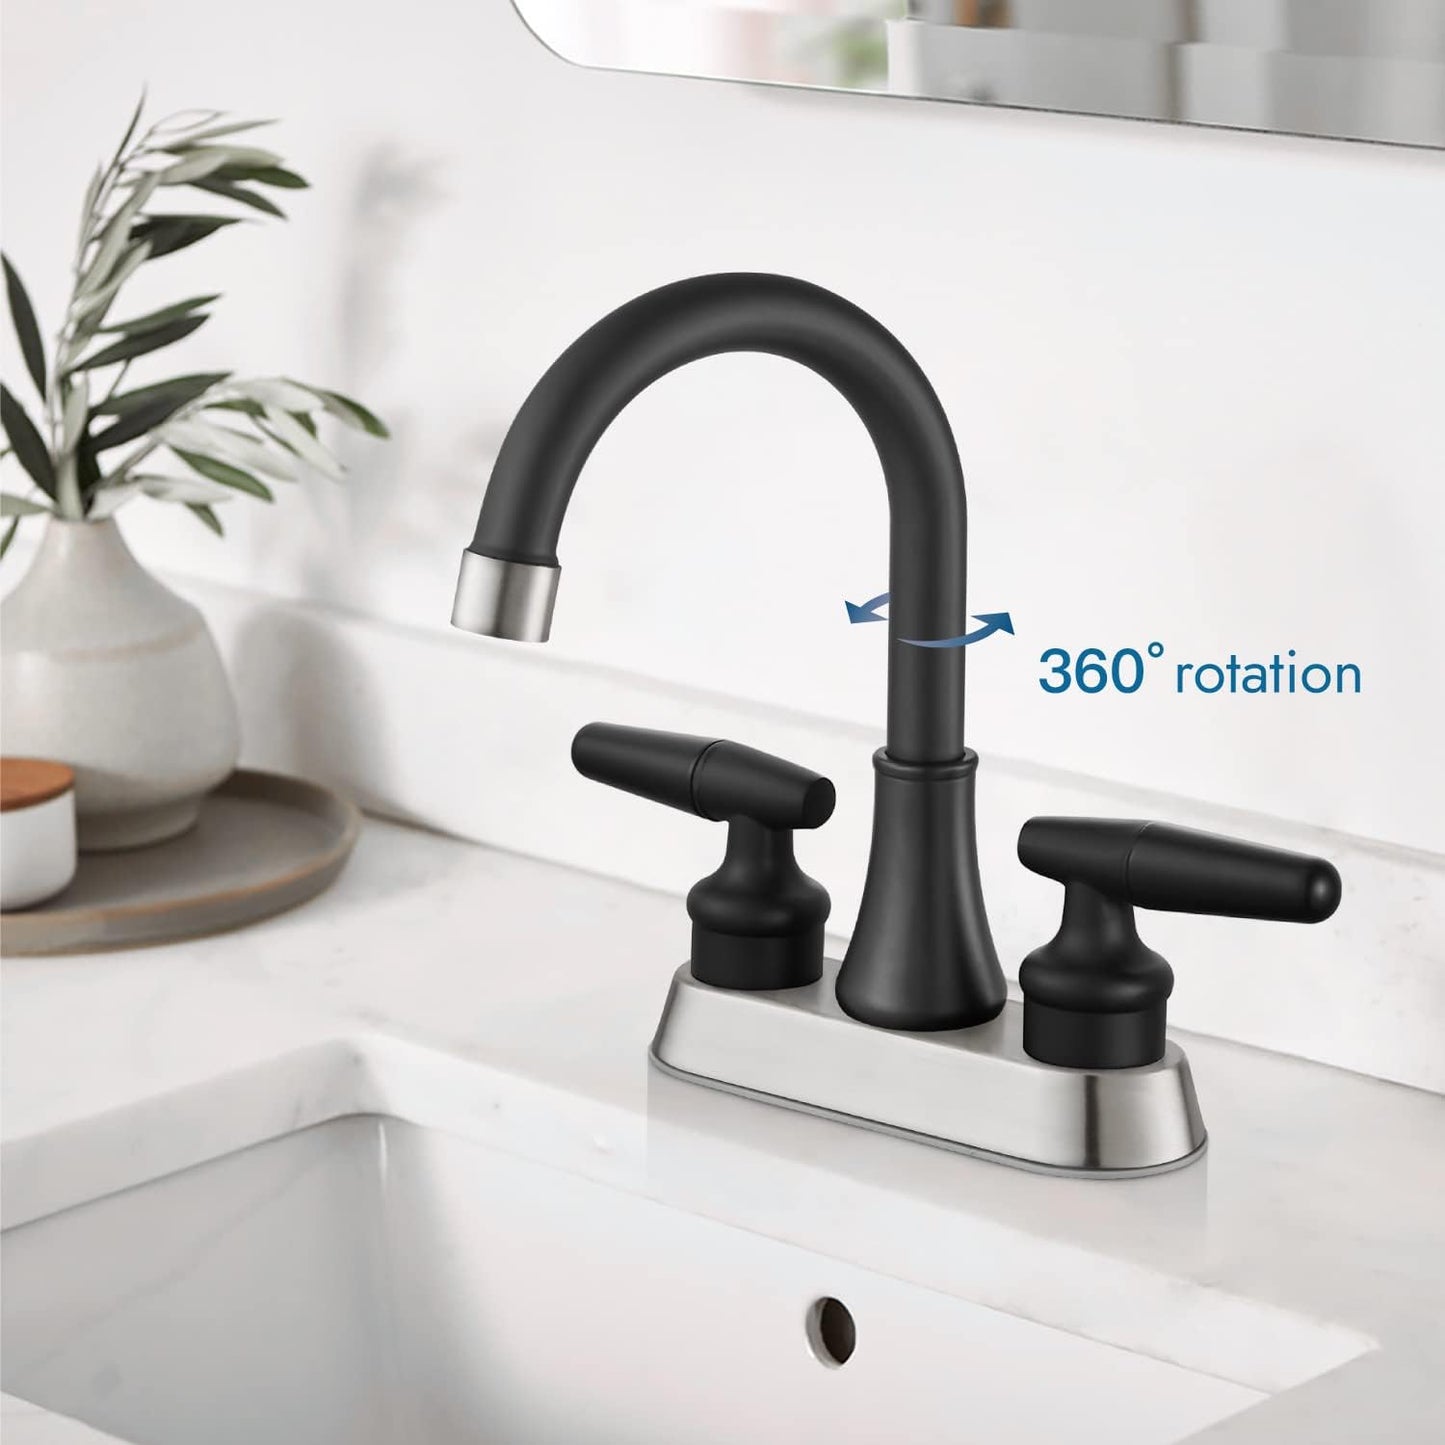 
                  
                    Cinwiny Centerset 4 Inch Bathroom Sink Faucet  Deck Mounted 2 Handles Lavatory Vanity Faucet Basin Mixer Tap with Pop up Drain and Water Supply Hoses
                  
                